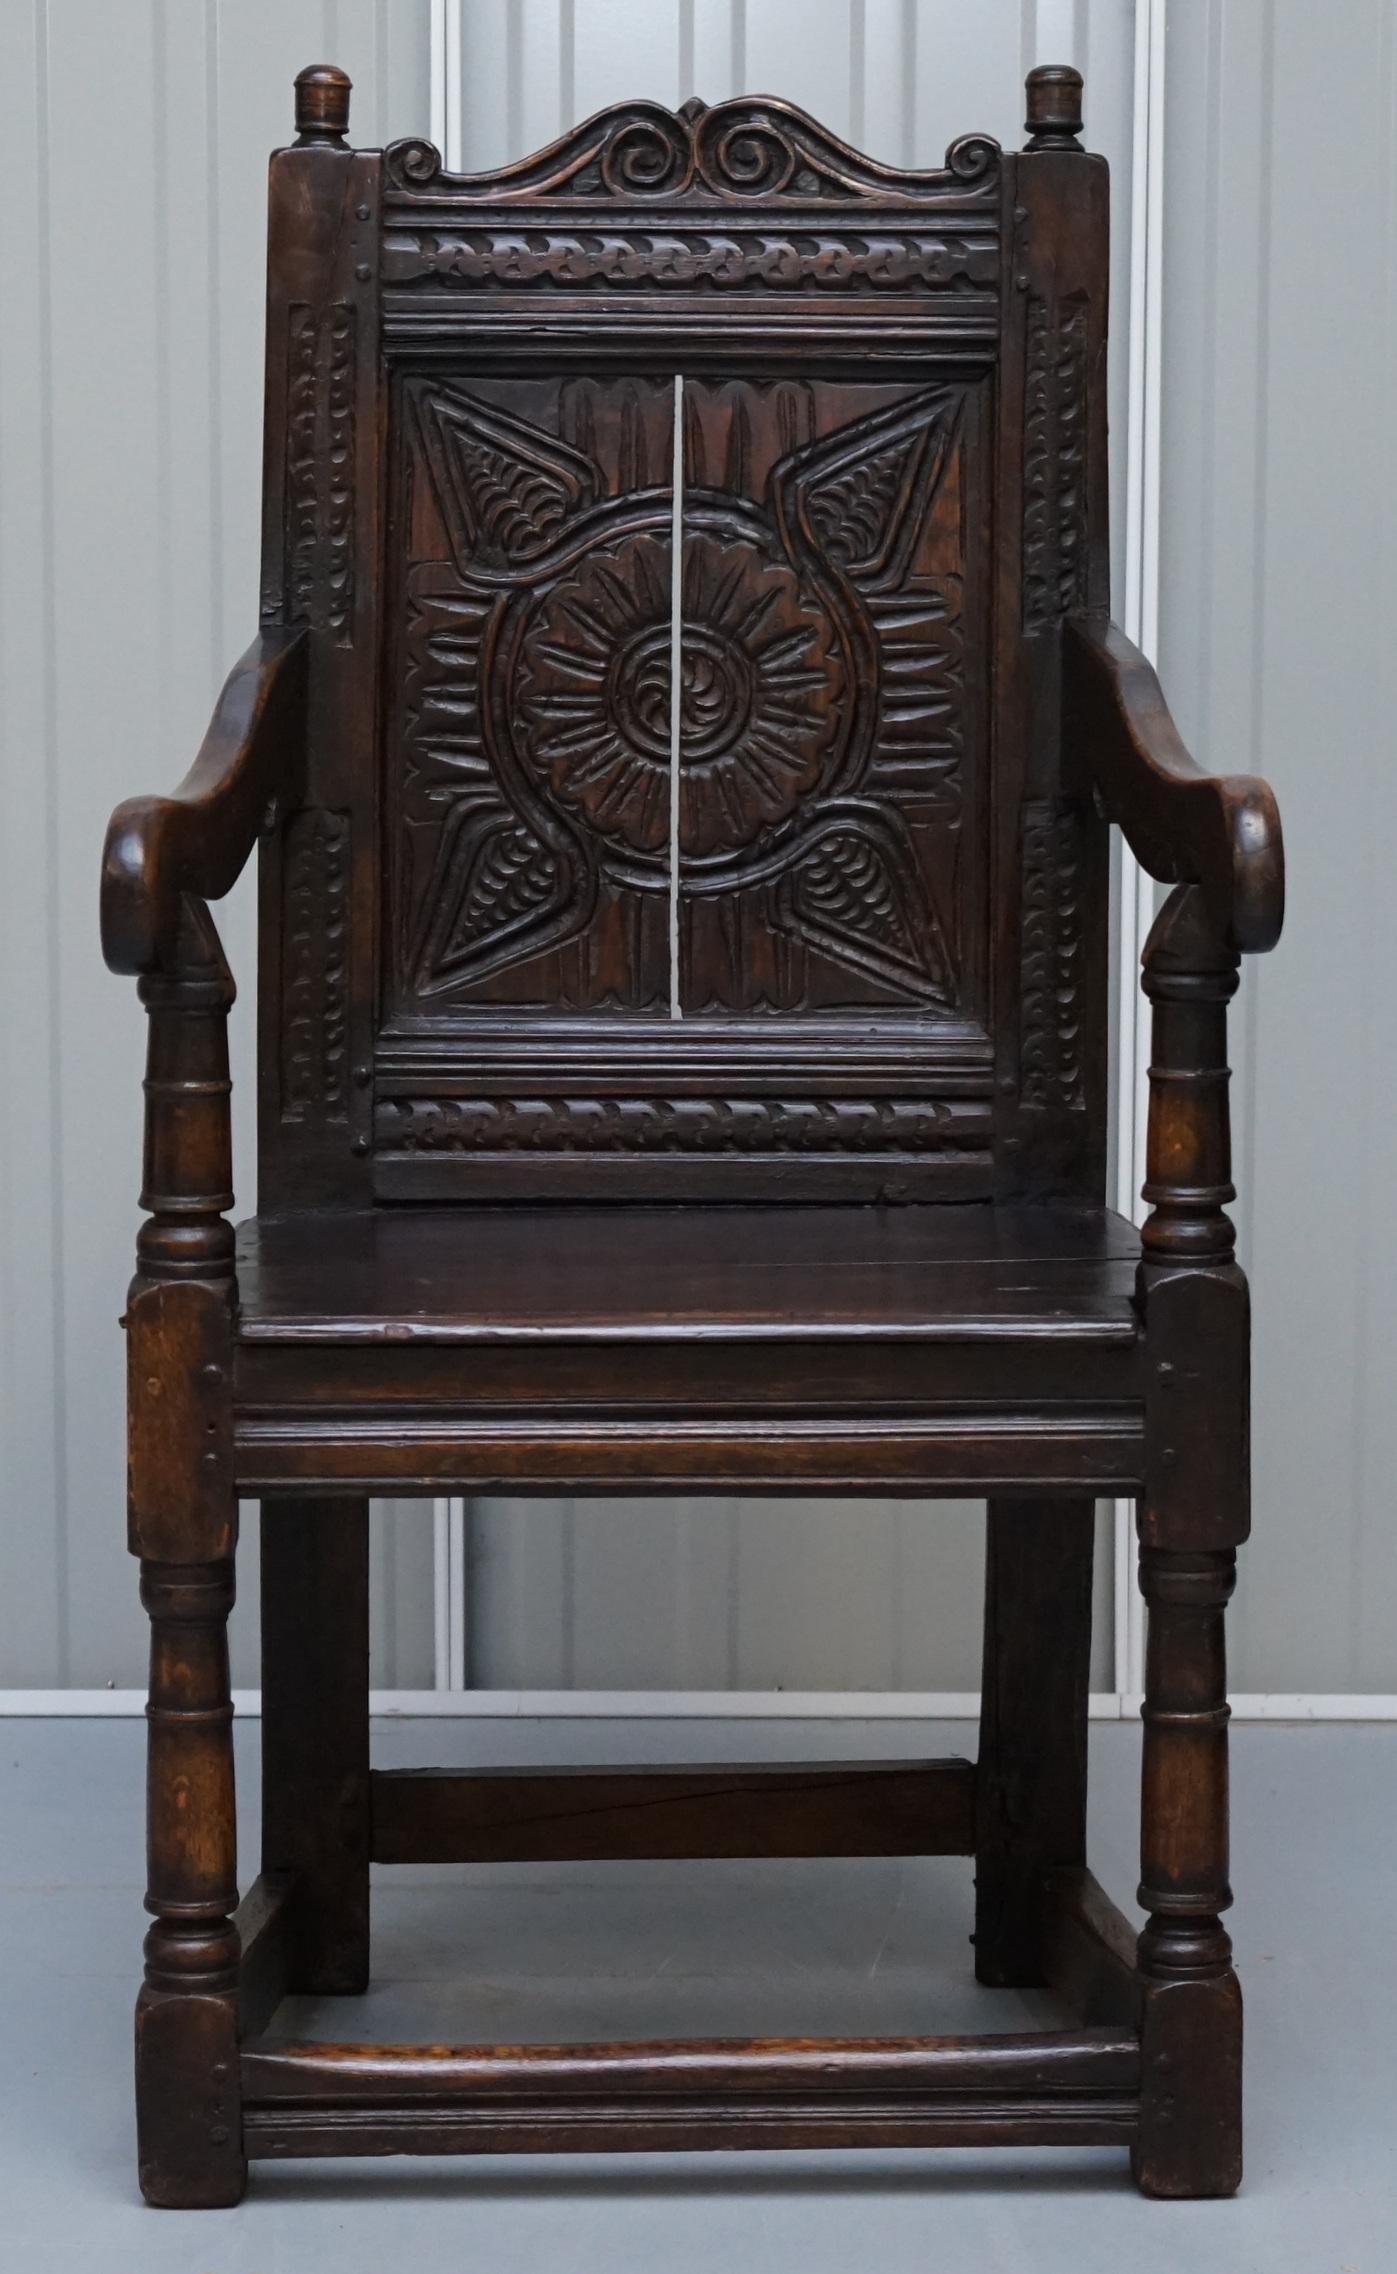 We are delighted to offer for sale this exceptionally rare original 17th century Northern English hand carved from solid oak Wainscot armchair

A highly decorative and original piece with turned finials above a moulded and carved back panel, the